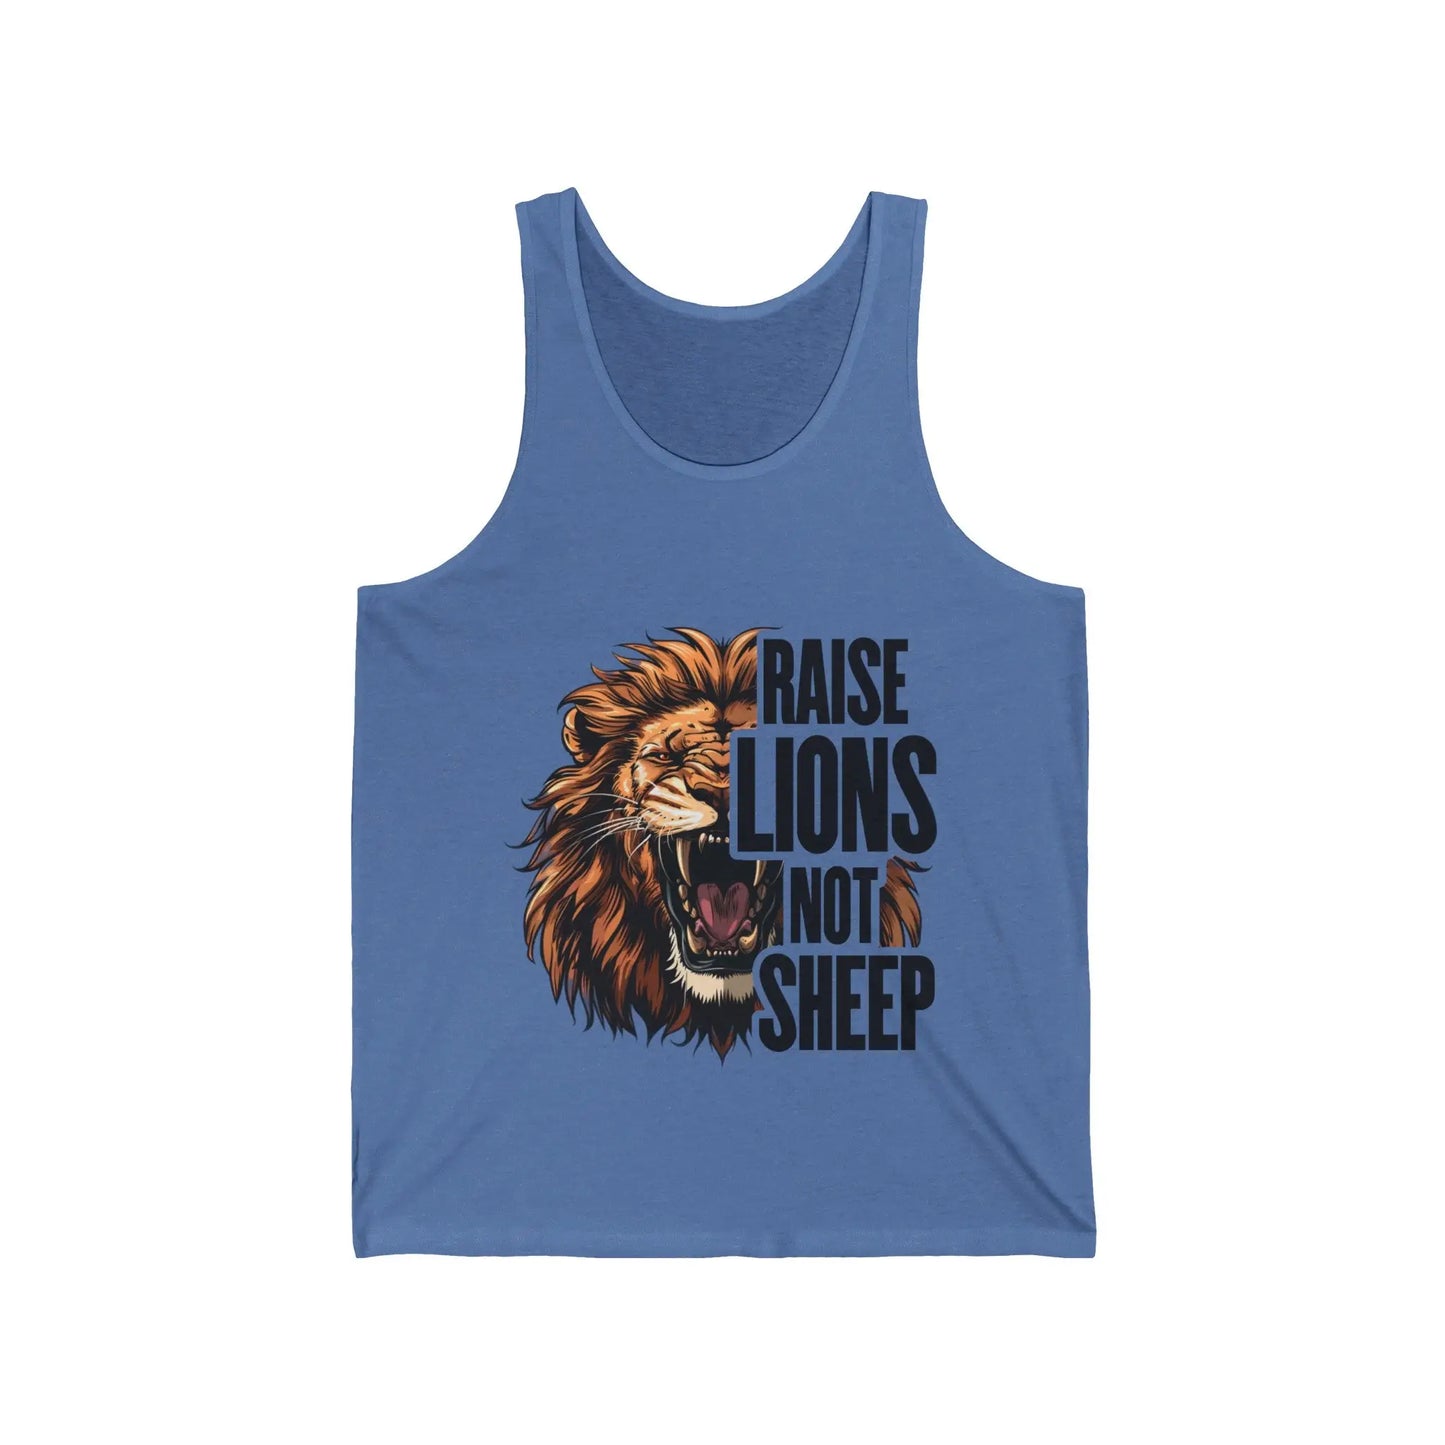 Raise Lions Not Sheep Men's Tank - Wicked Tees